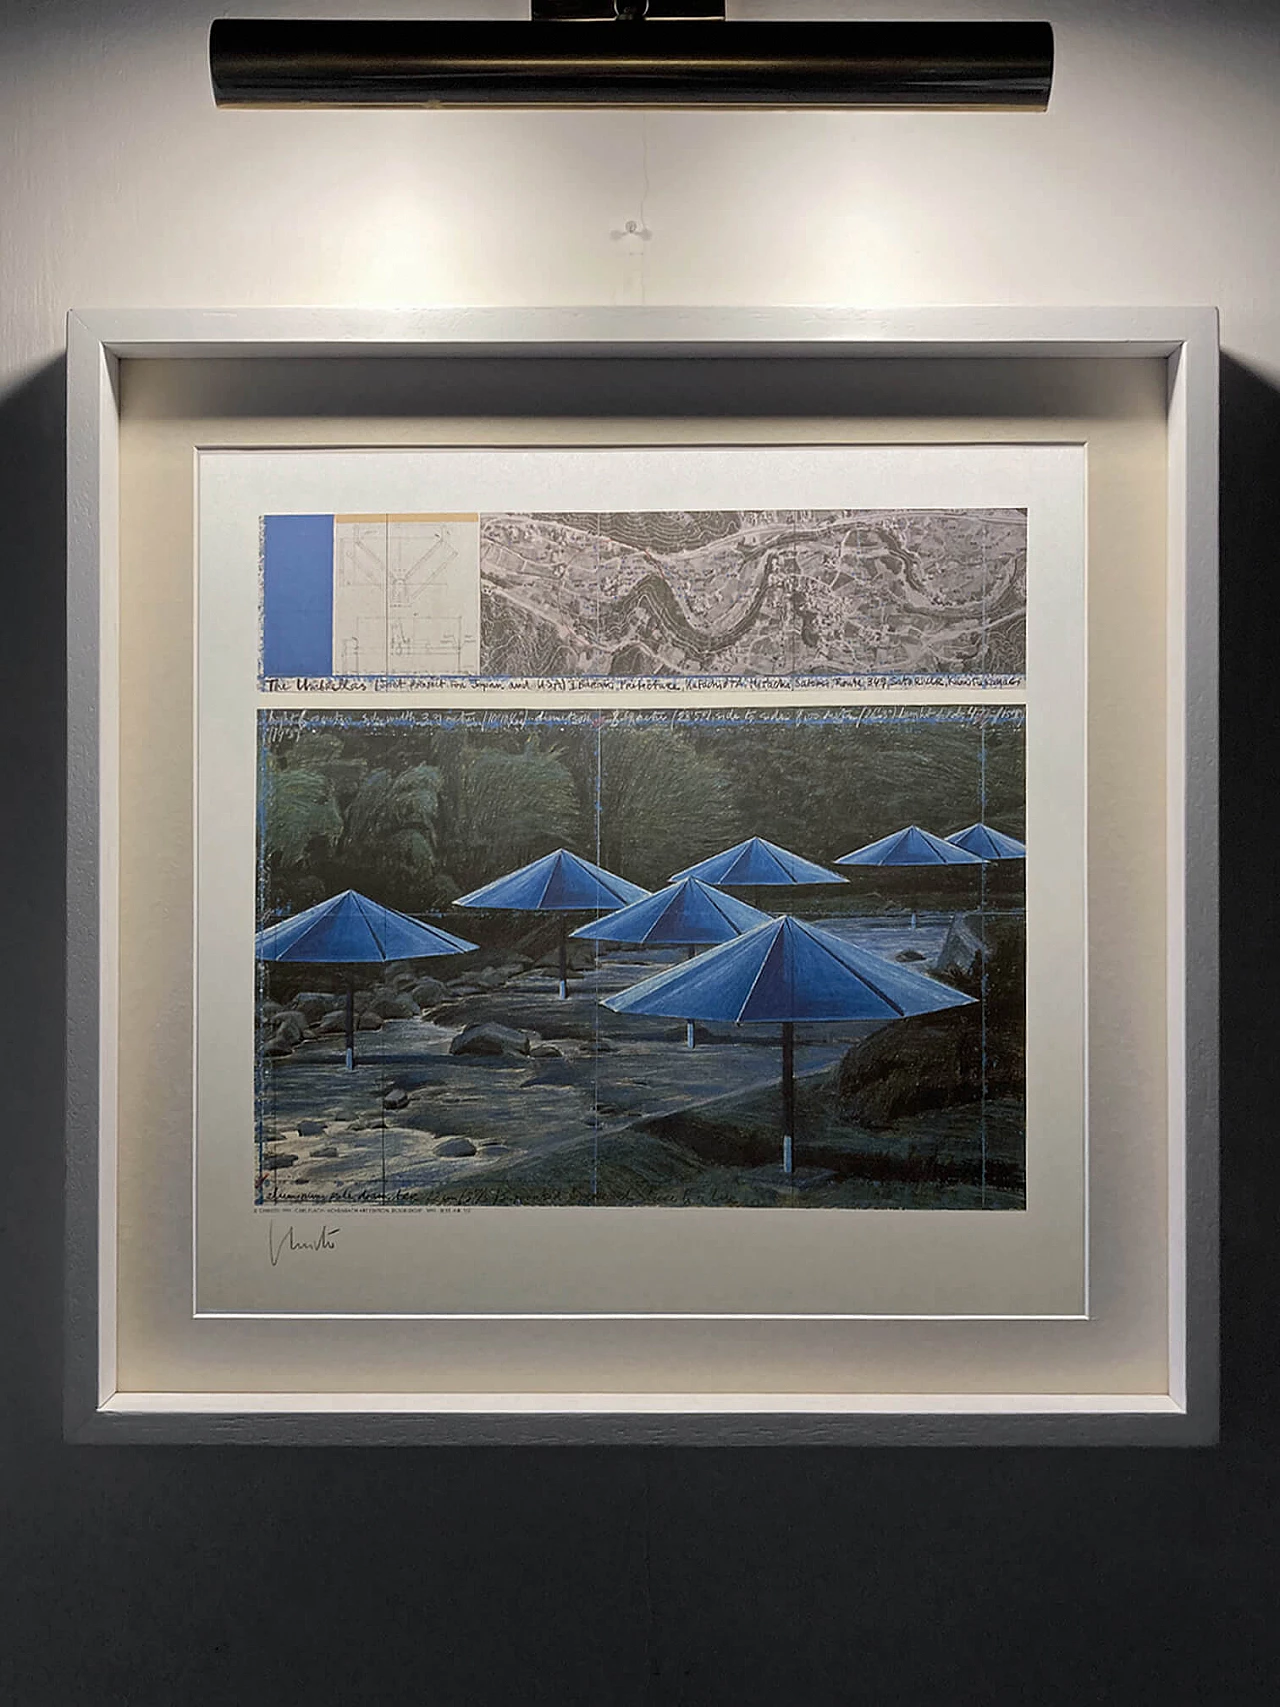 Christo, The Umbrellas - Joint Project for Japan and USA, litografia, 1991 2